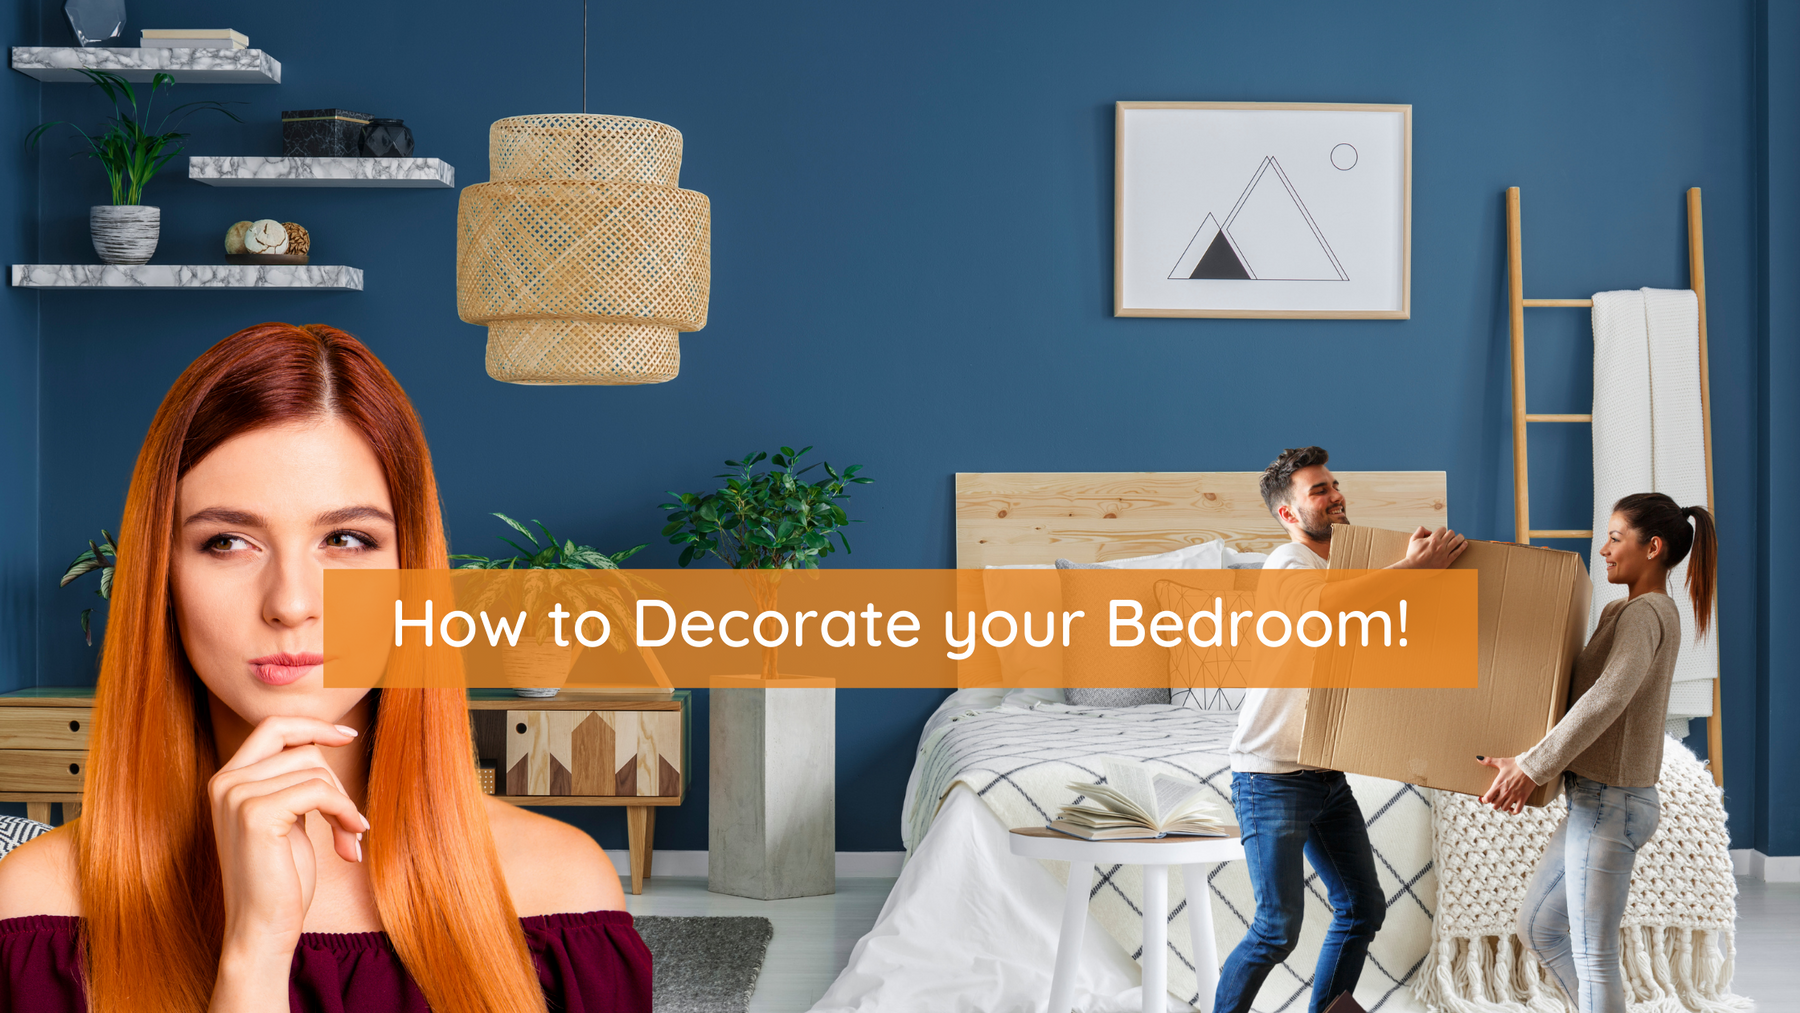 How to Decorate a Bedroom - Mainland Furniture NZ